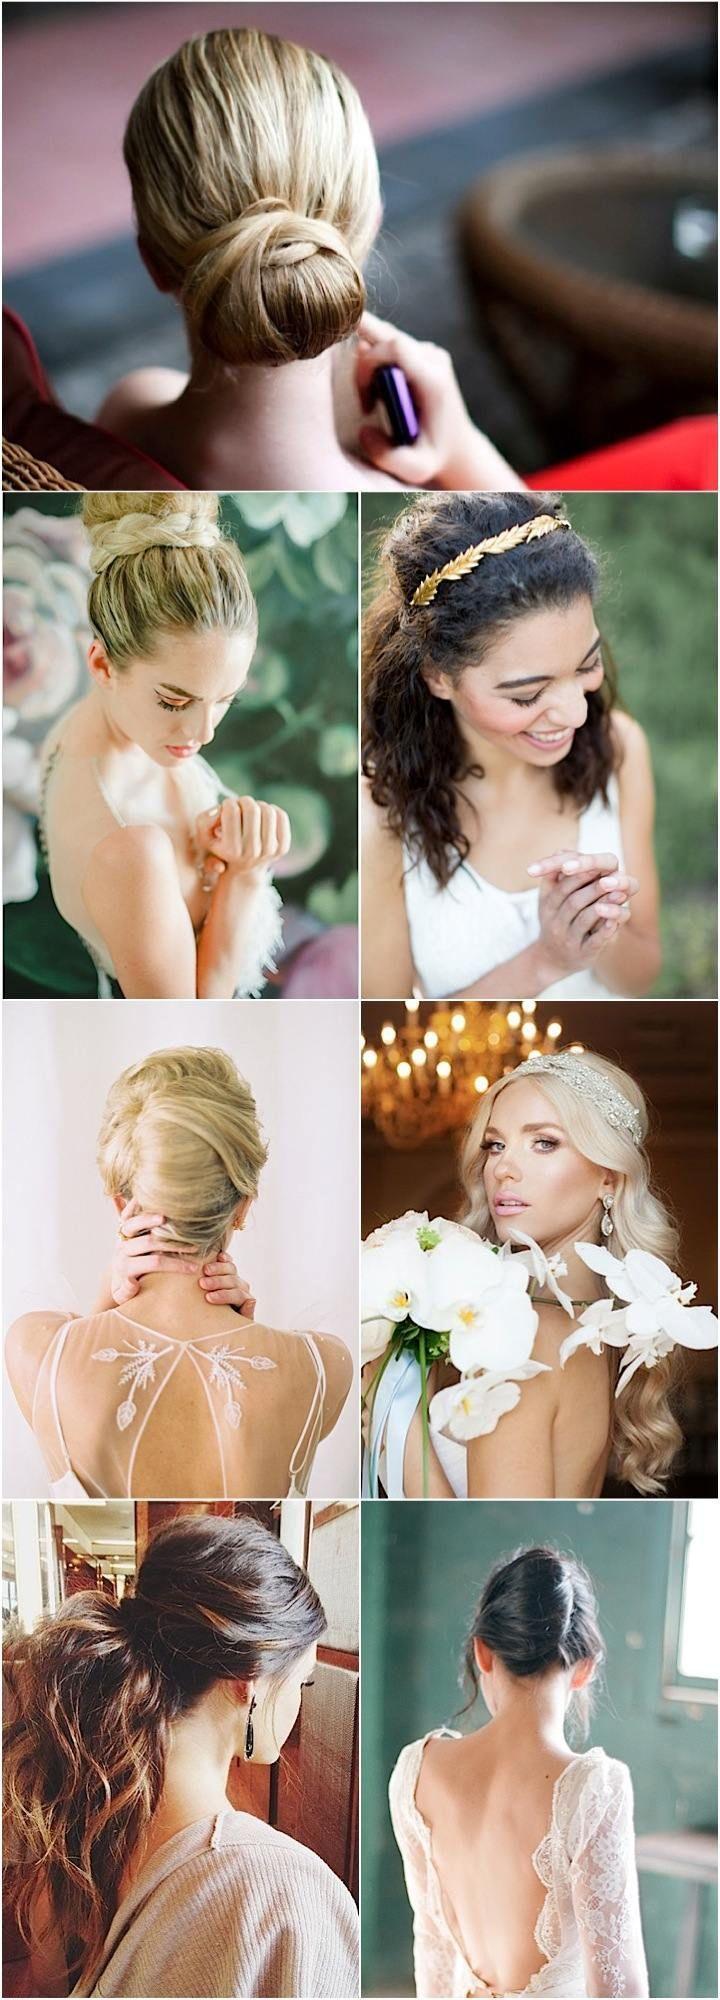 Hochzeit - Waves, Curls And Updos: Wedding Hairstyles For A Romantic Bridal Look